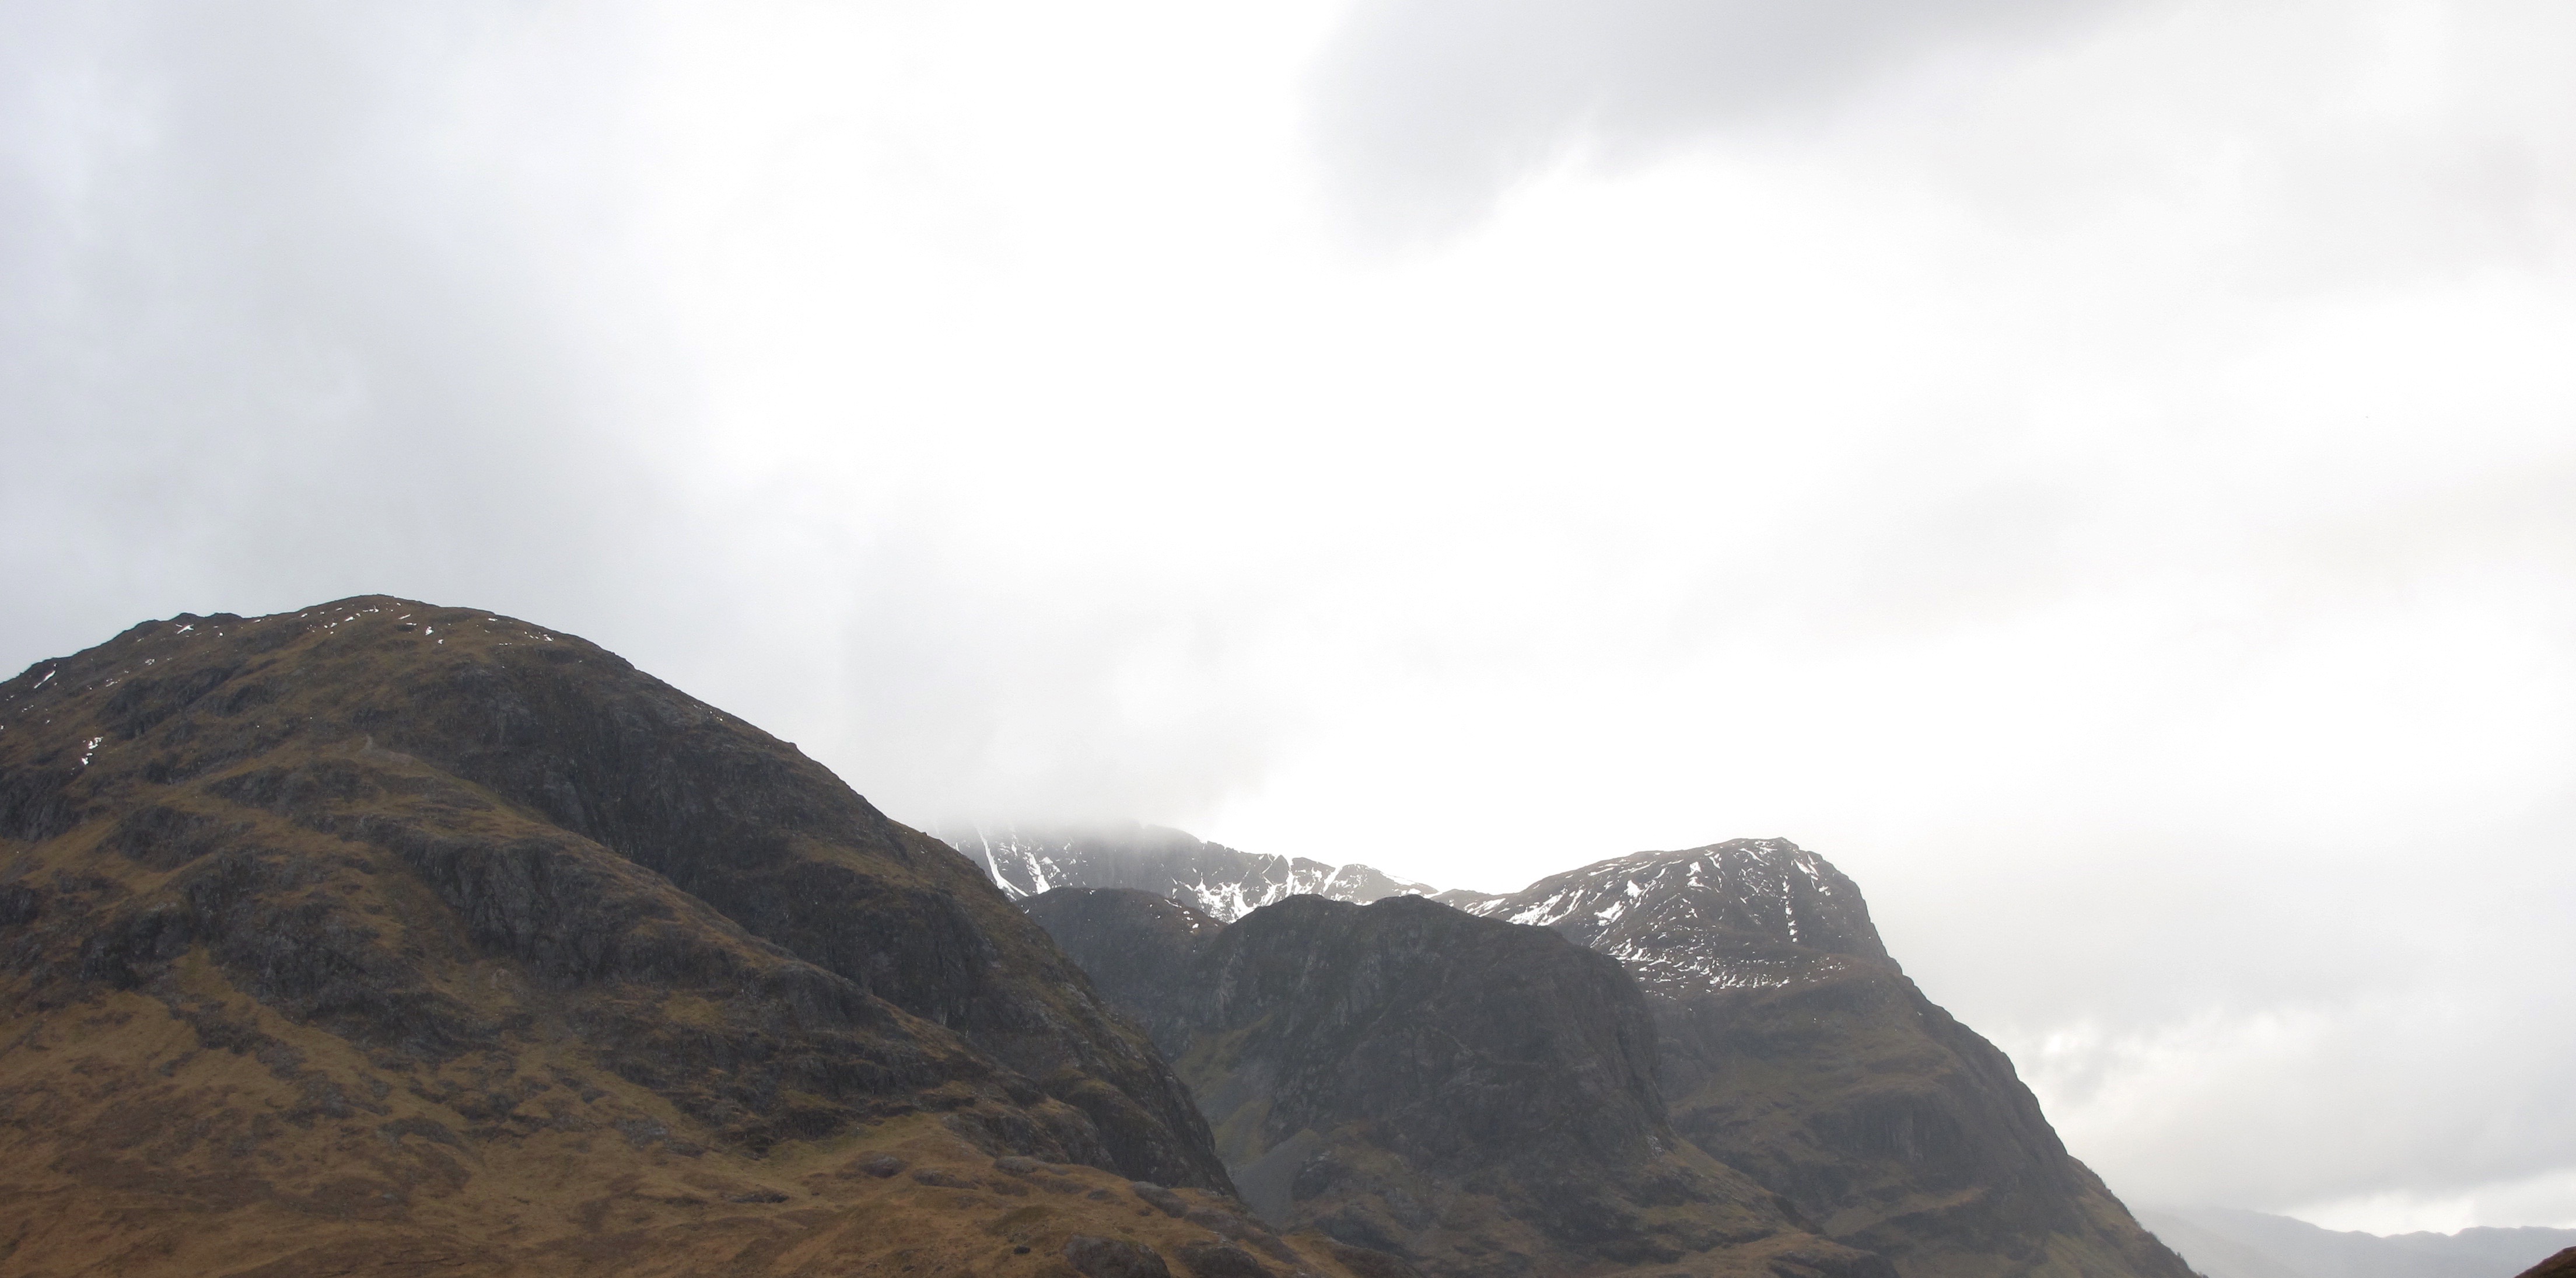 The 3 sisters of Glen Coe.